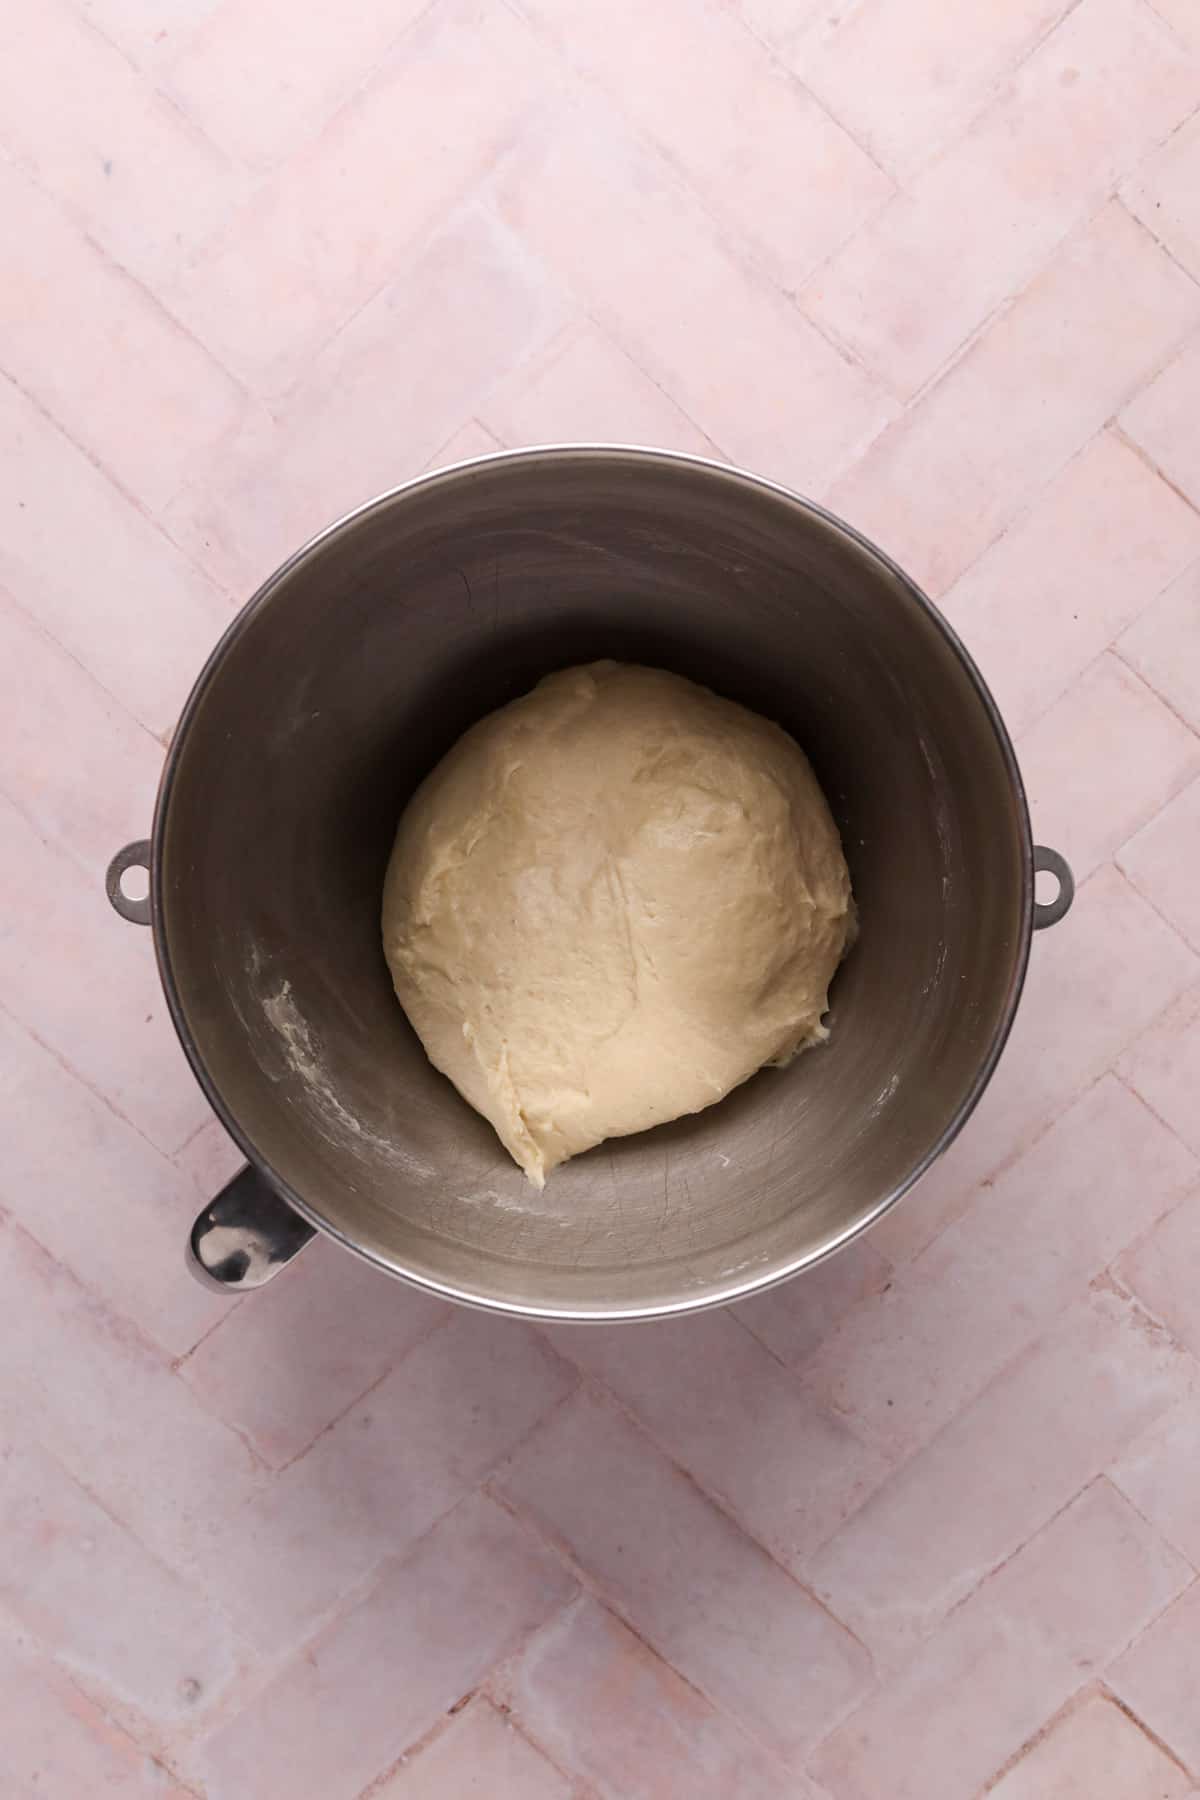 Cinnamon roll dough in a stand mixer bowl ready for proofing.